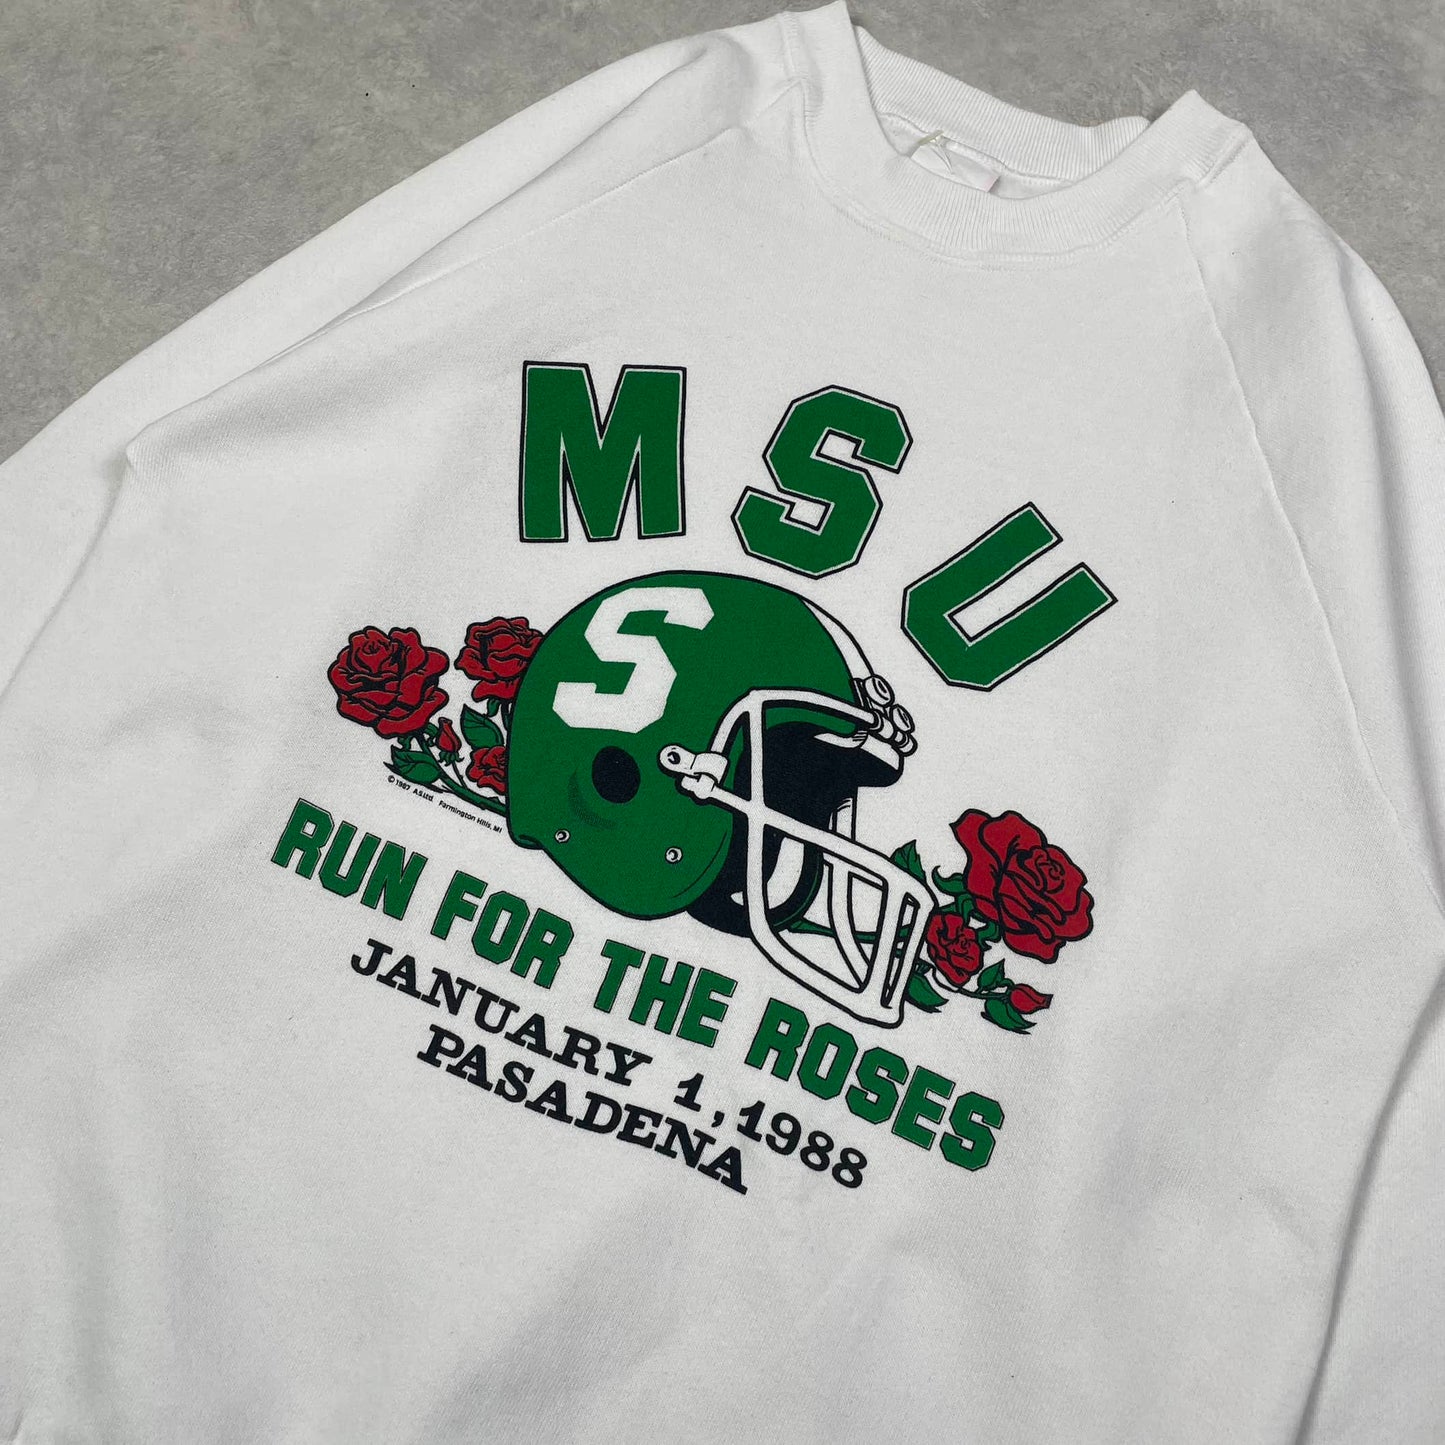 Vintage Sweater ”MSU Run for the Roses” White Made in USA 80’s